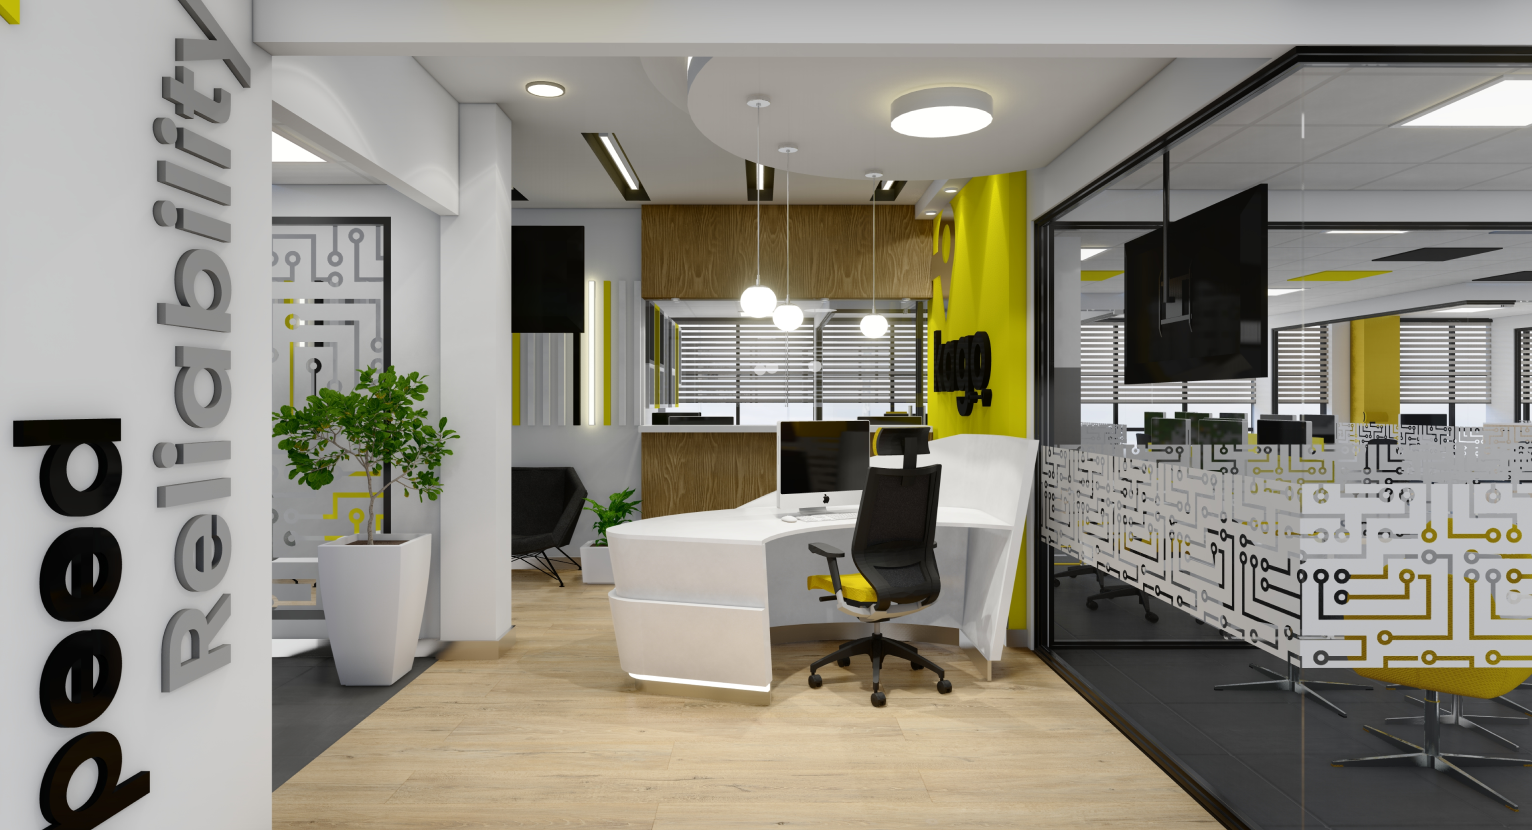 Interior Design Styles in Commercial Spaces